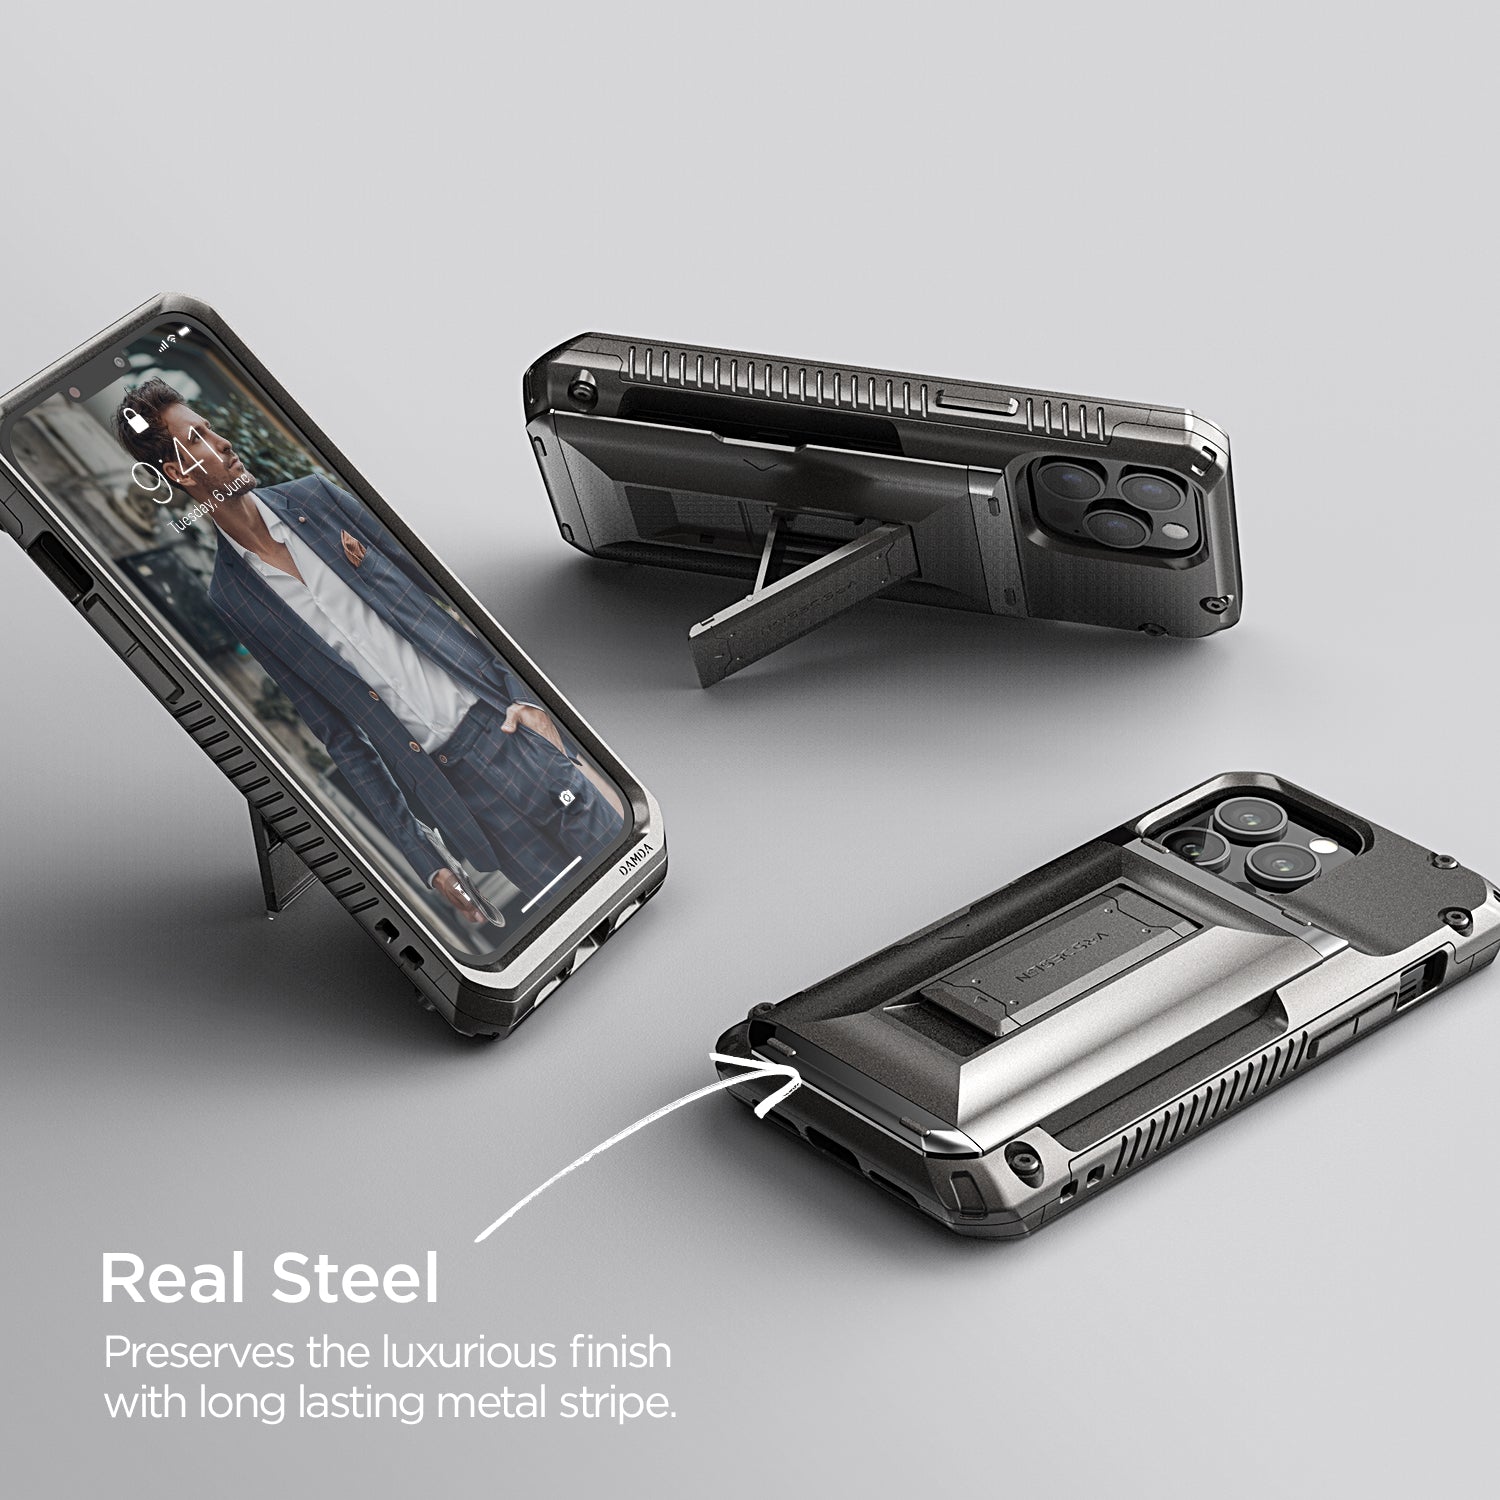 Rugged modern Apple iPhone 14 Pro Max case Glide Hybrid by VRS